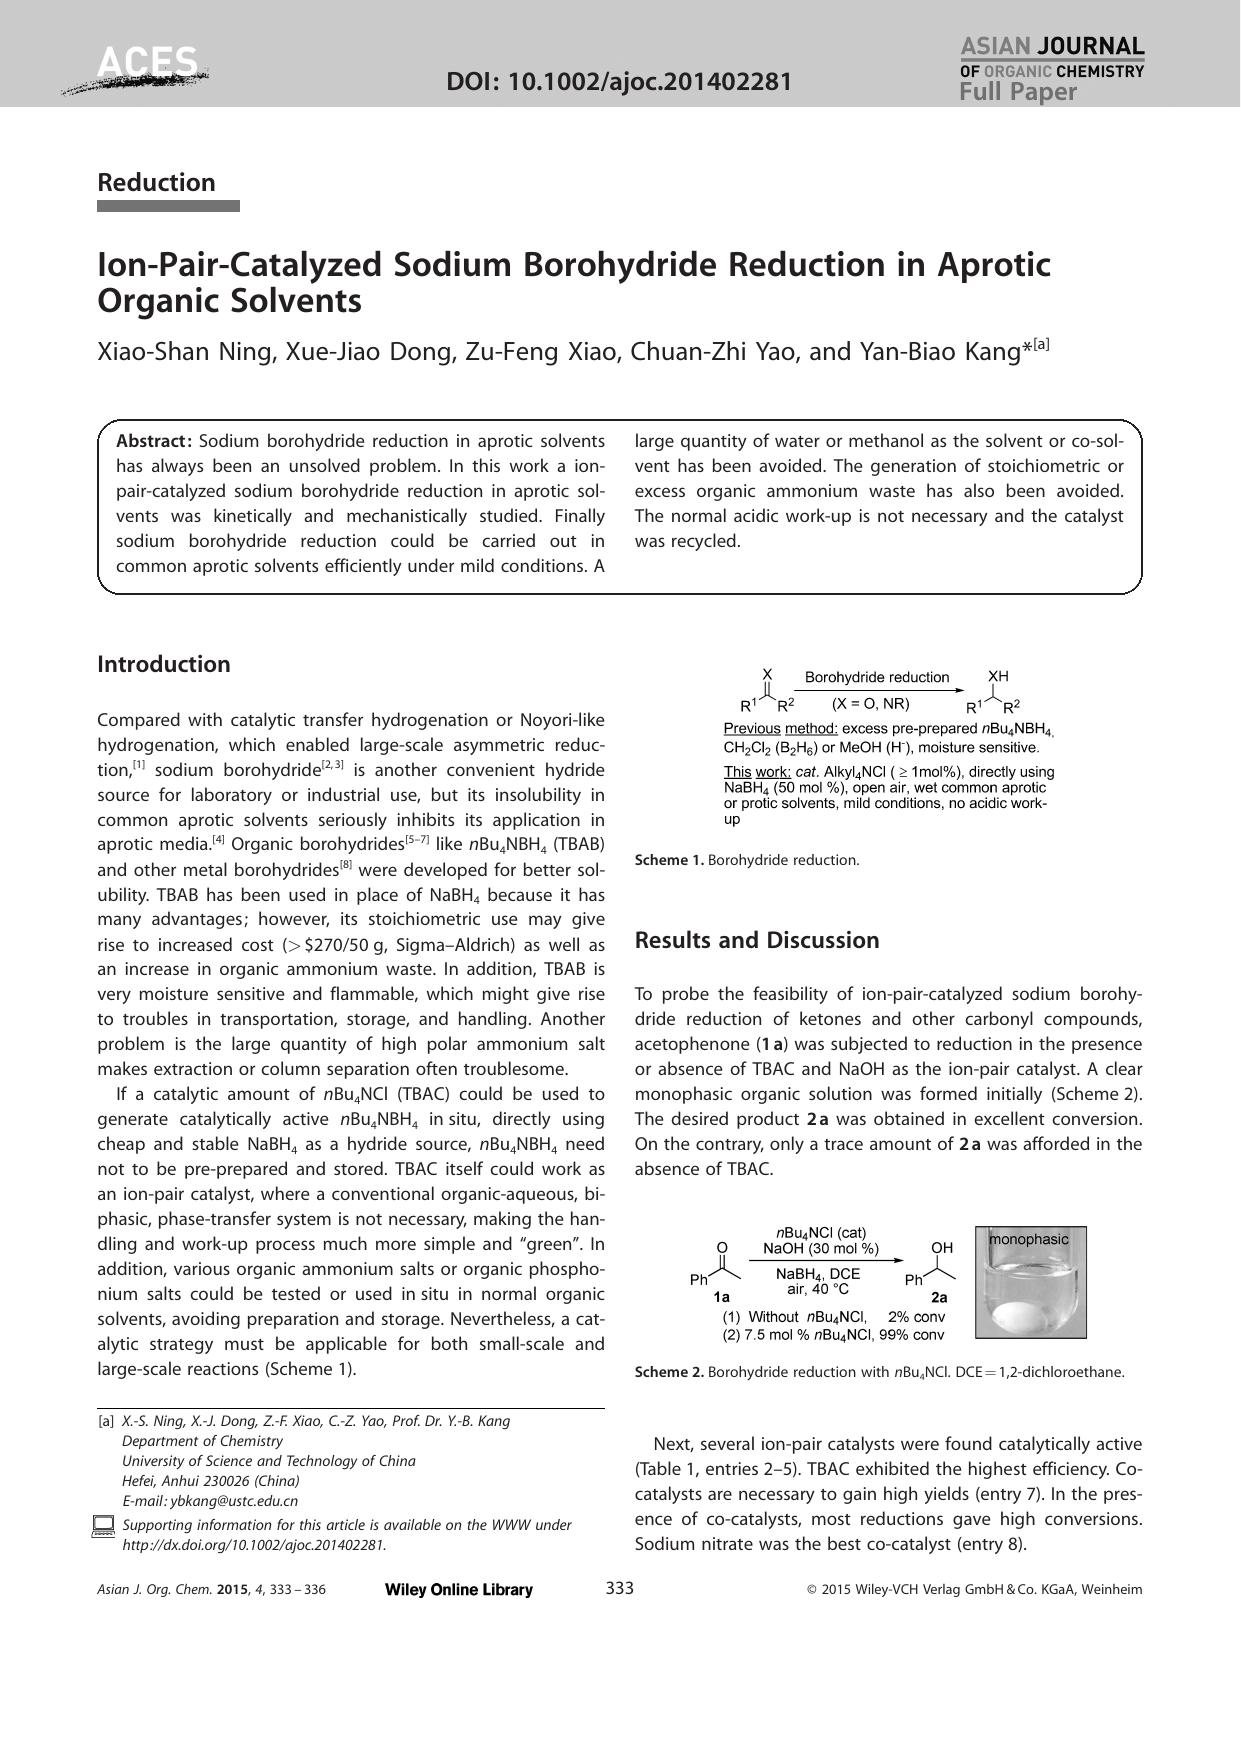 IonPairCatalyzed Sodium Borohydride Reduction in Aprotic Organic Solvents by Unknown